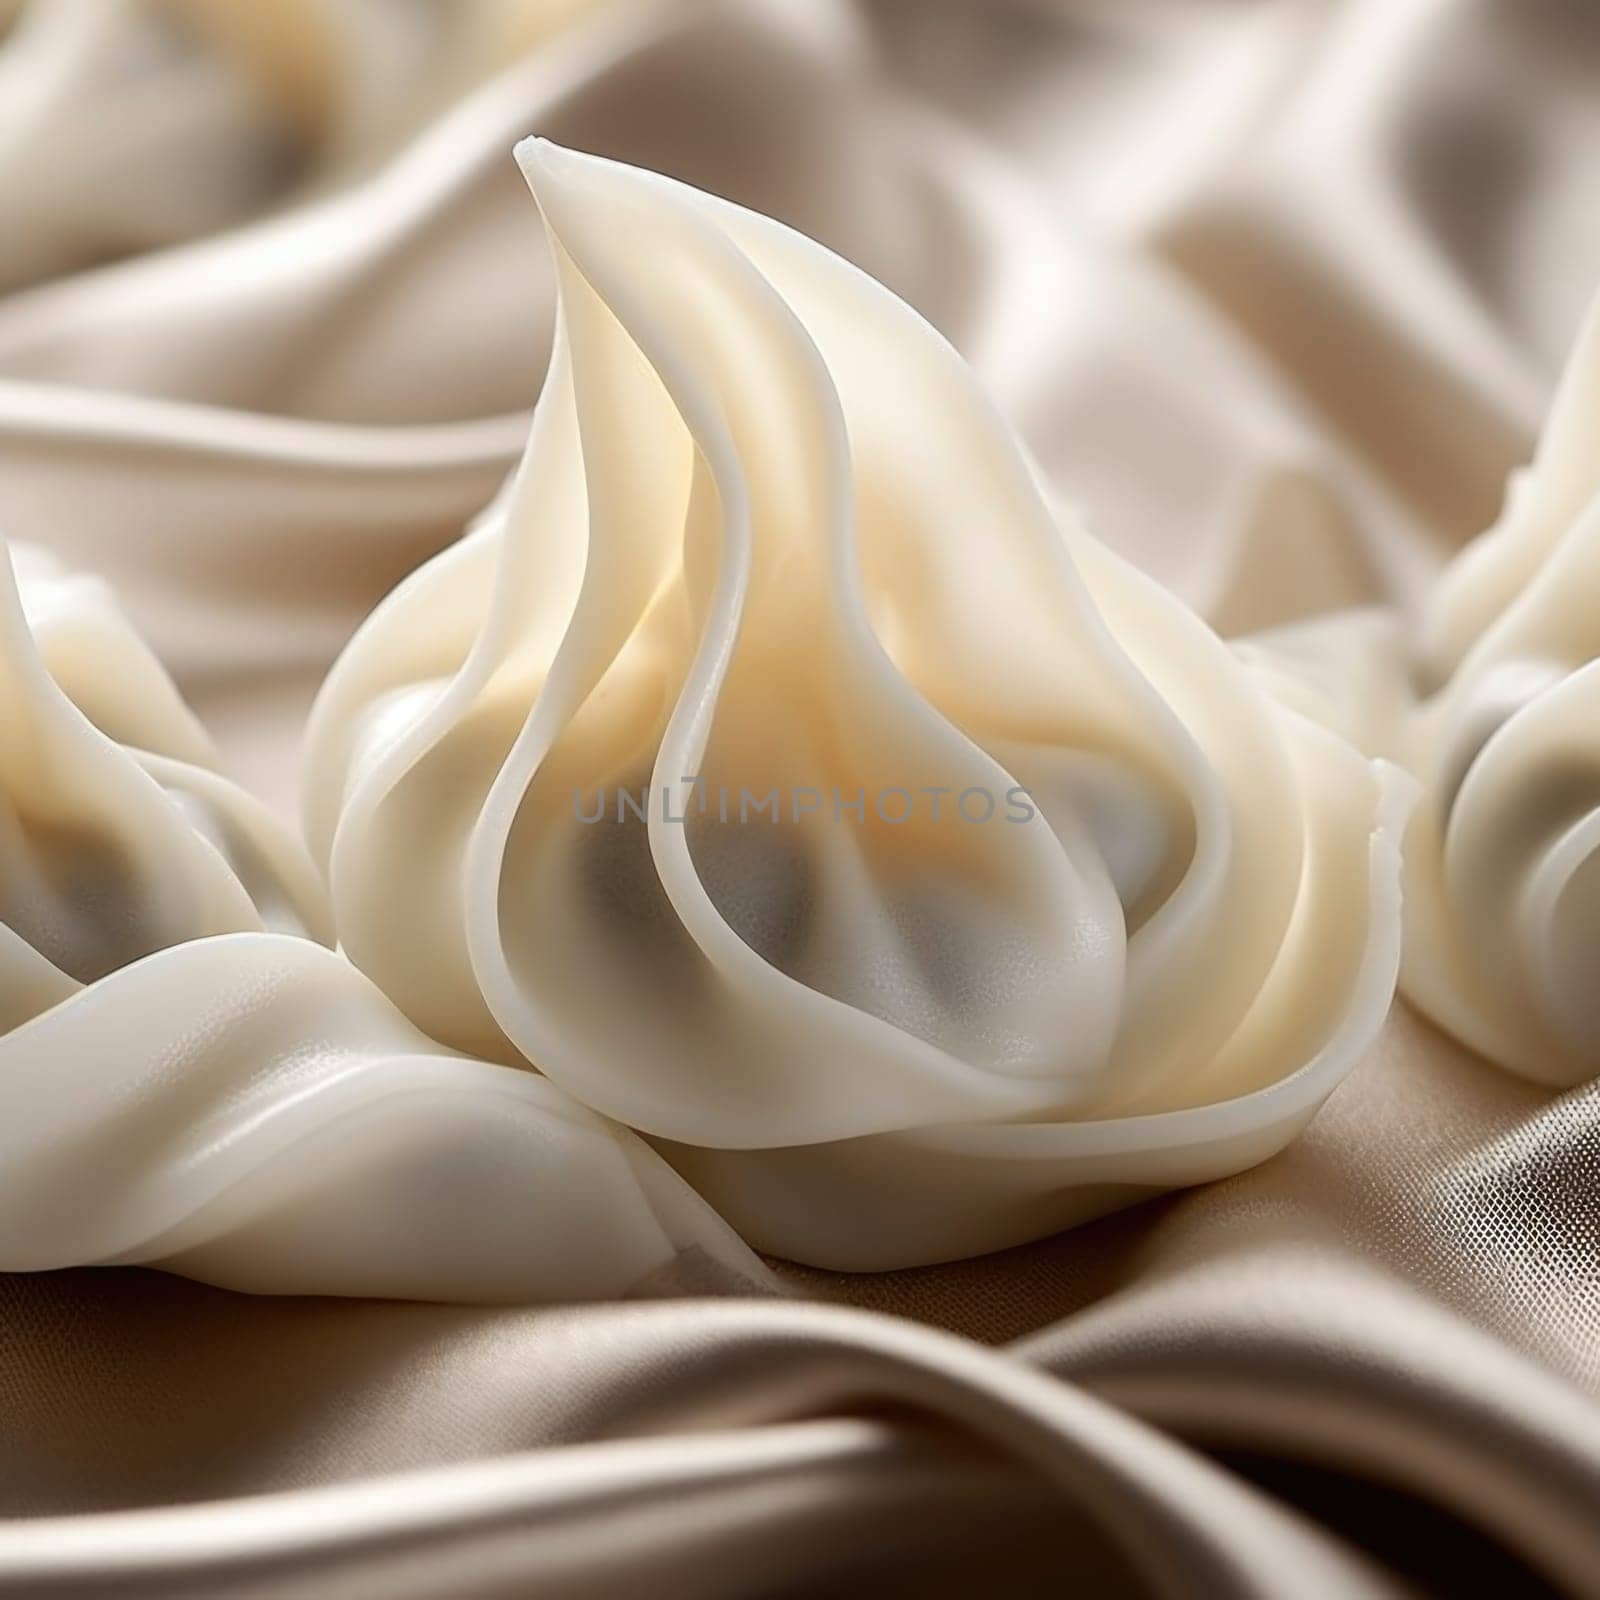 A close up of some white dumplings on a silk cloth